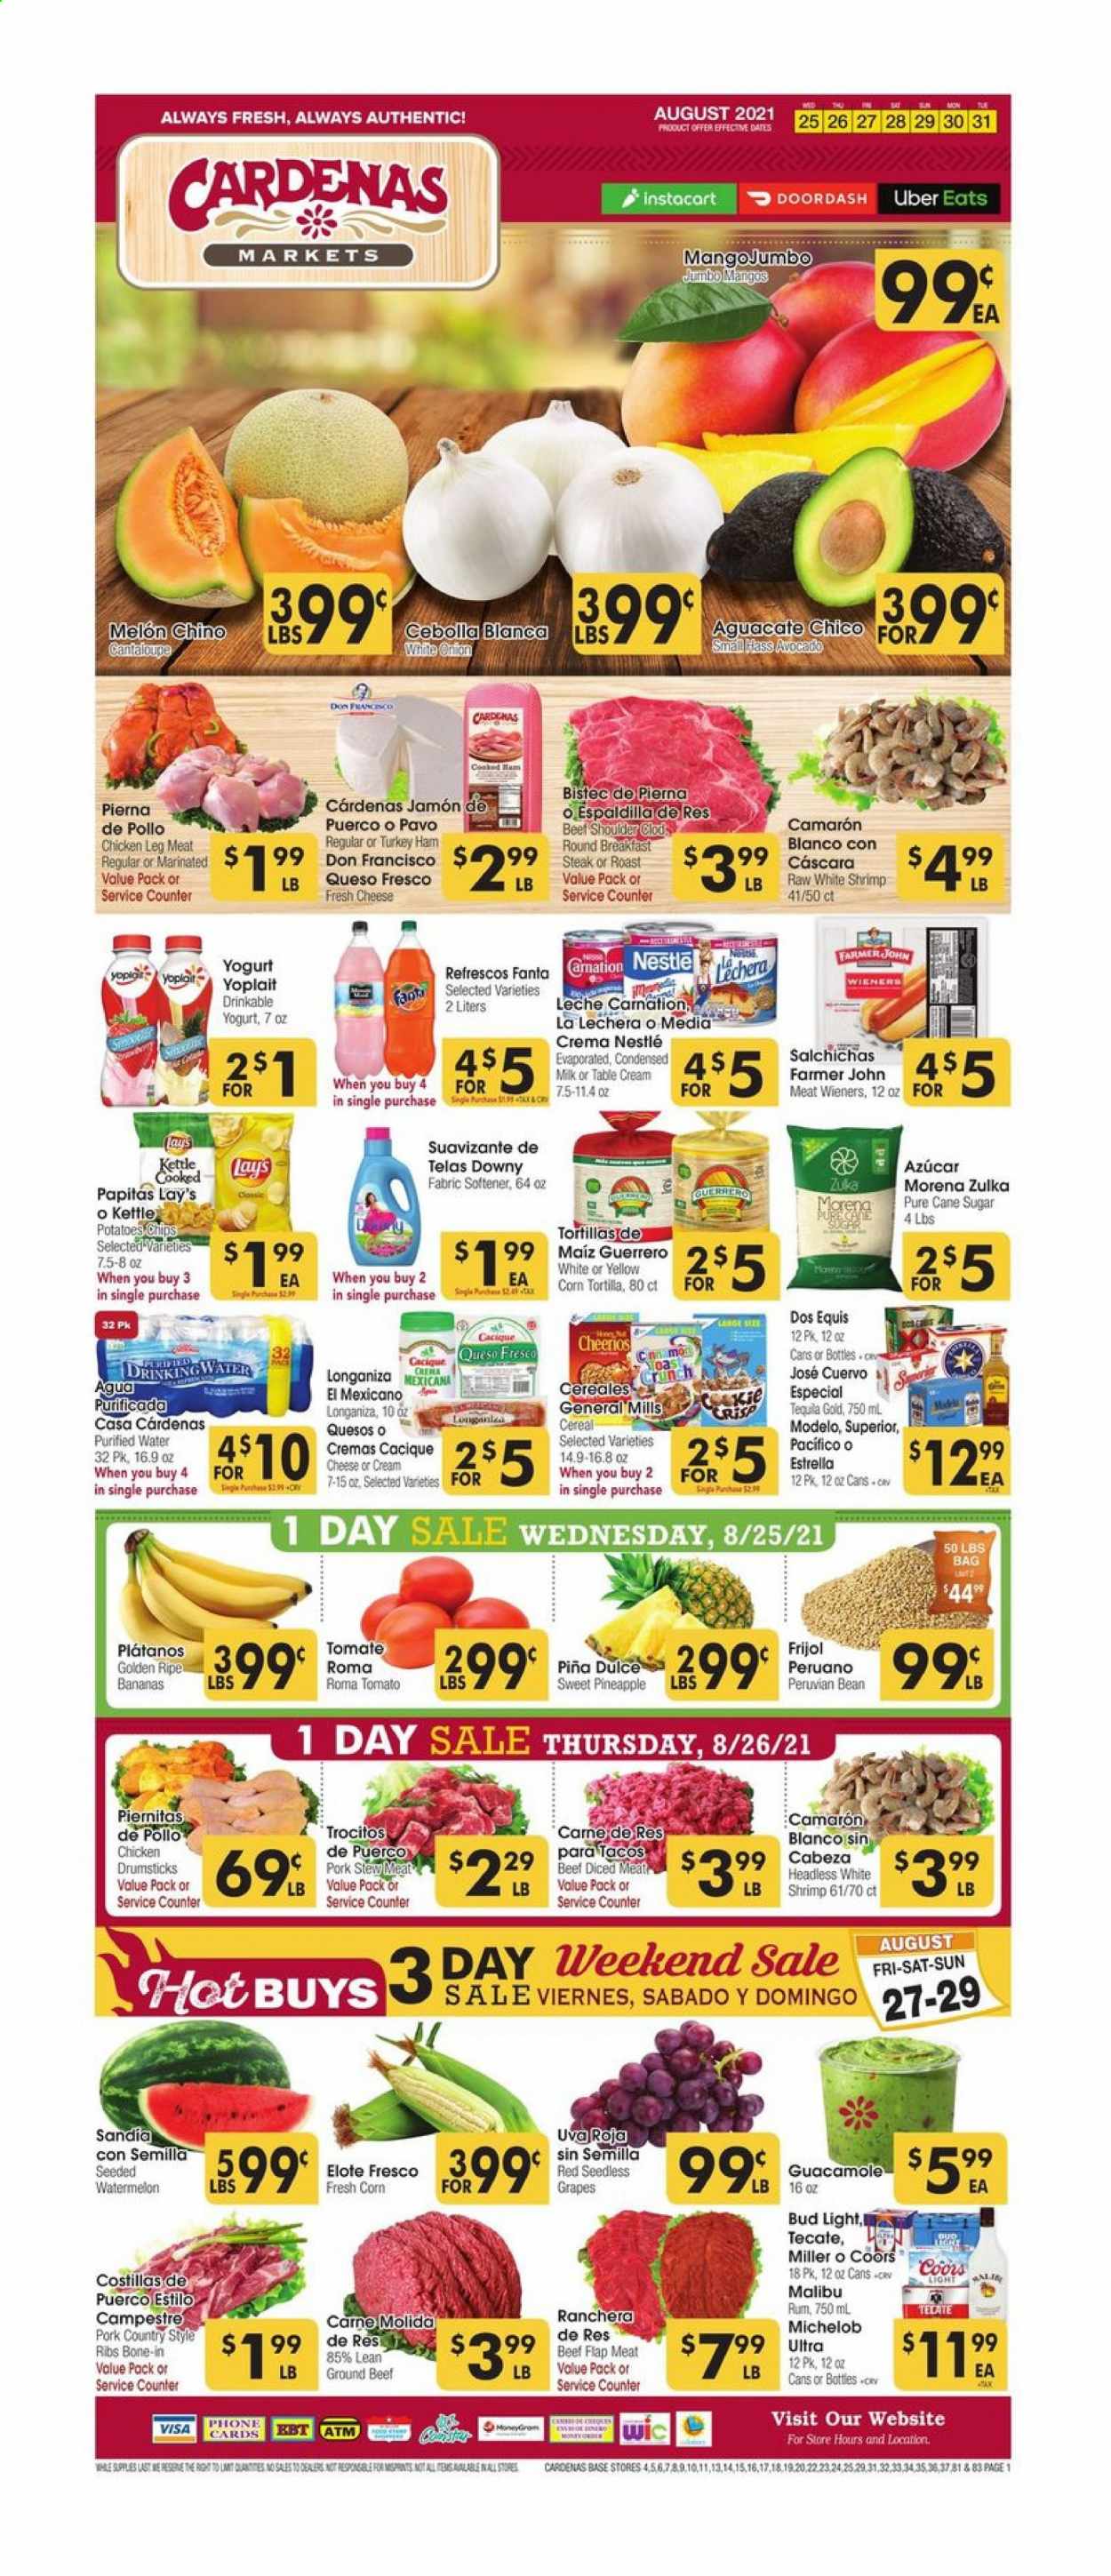 thumbnail - Cardenas Flyer - 08/25/2021 - 08/31/2021 - Sales products - stew meat, seedless grapes, tortillas, cantaloupe, tomatoes, bananas, grapes, watermelon, pineapple, shrimps, ham, guacamole, queso fresco, yoghurt, Yoplait, milk, condensed milk, Nestlé, chips, Lay’s, cane sugar, sugar, cereals, Cheerios, Fanta, purified water, rum, tequila, Malibu, beer, Bud Light, Miller, Modelo, chicken legs, chicken drumsticks, beef meat, ground beef, steak, pork ribs, country style ribs, Downy Laundry, melons, Coors, Dos Equis, Michelob. Page 1.